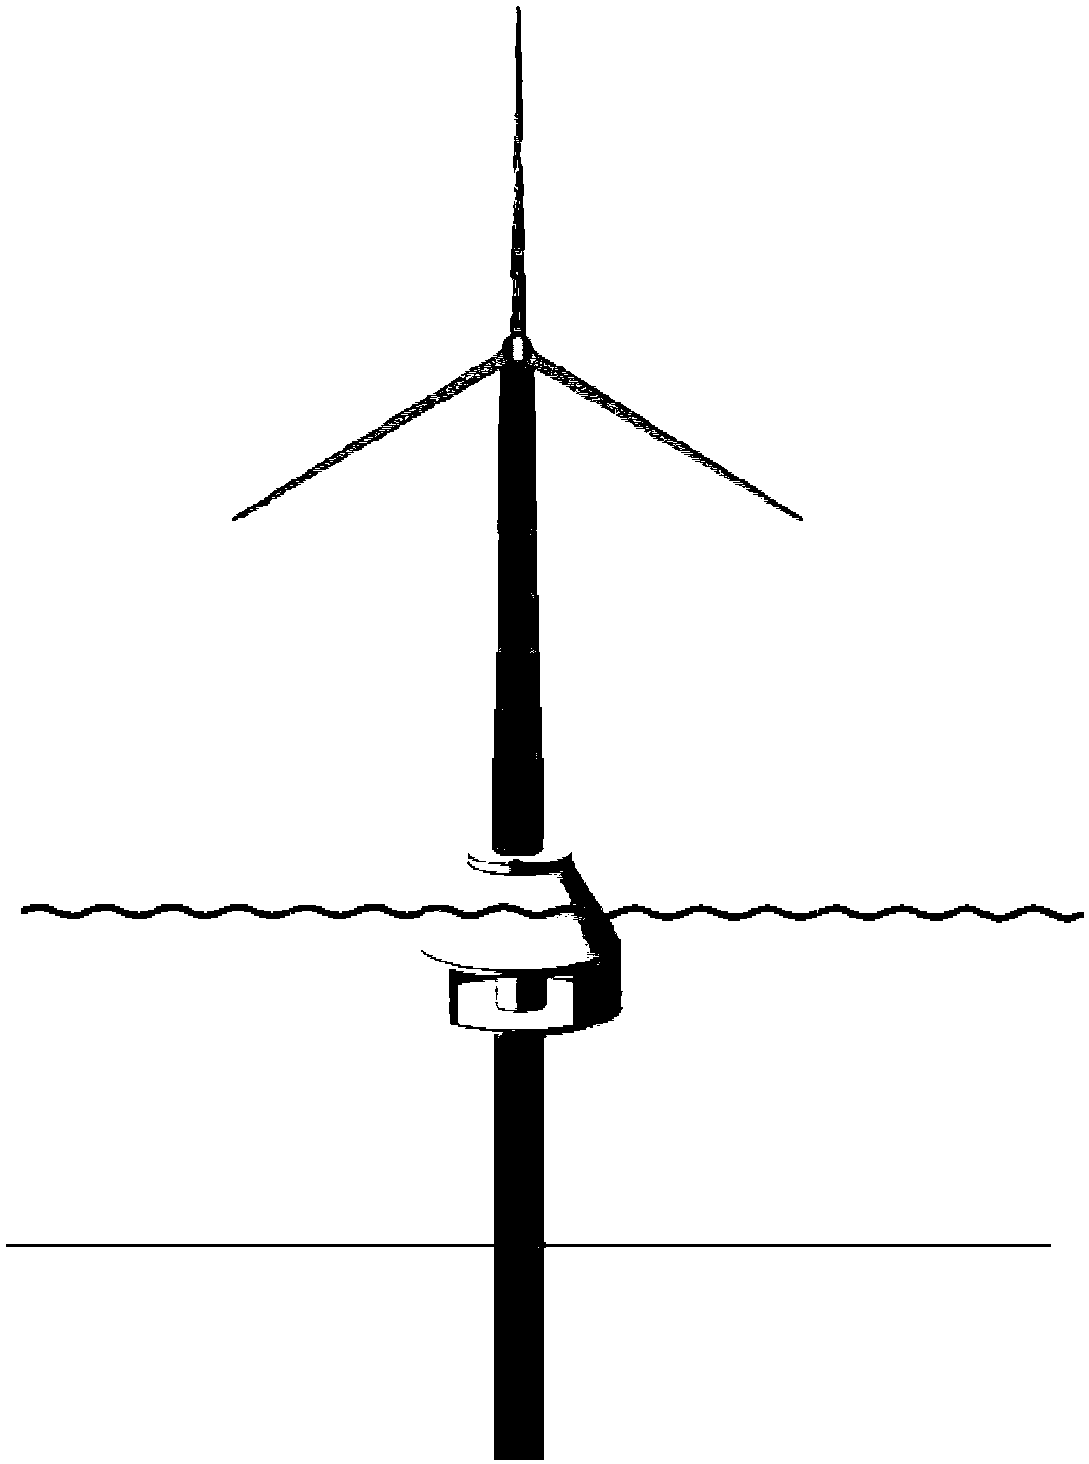 Single-pile-type wind energy-tide energy integrated power generation system applicable to offshore area